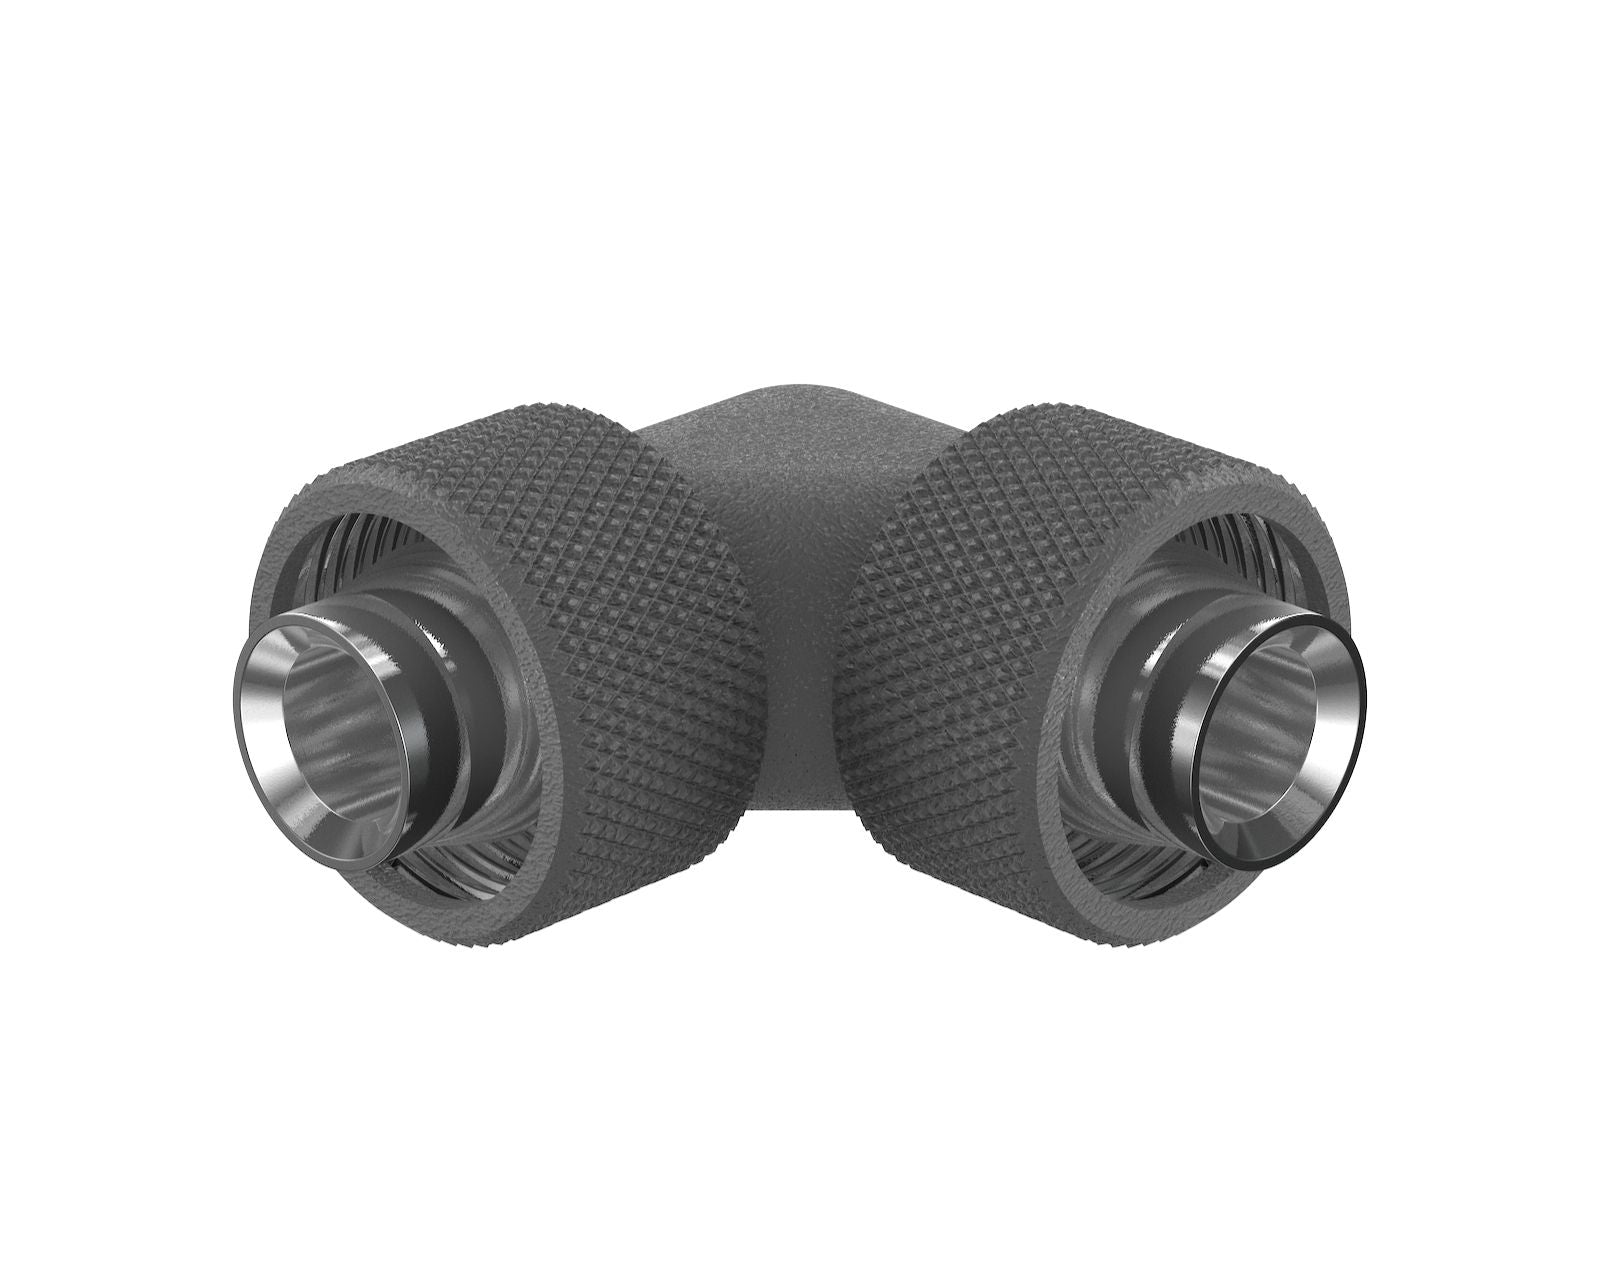 PrimoChill SecureFit SX - Premium 90 Degree Compression Fitting Set For 1/2in ID x 3/4in OD Flexible Tubing (F-SFSX3490) - Available in 20+ Colors, Custom Watercooling Loop Ready - TX Matte Gun Metal